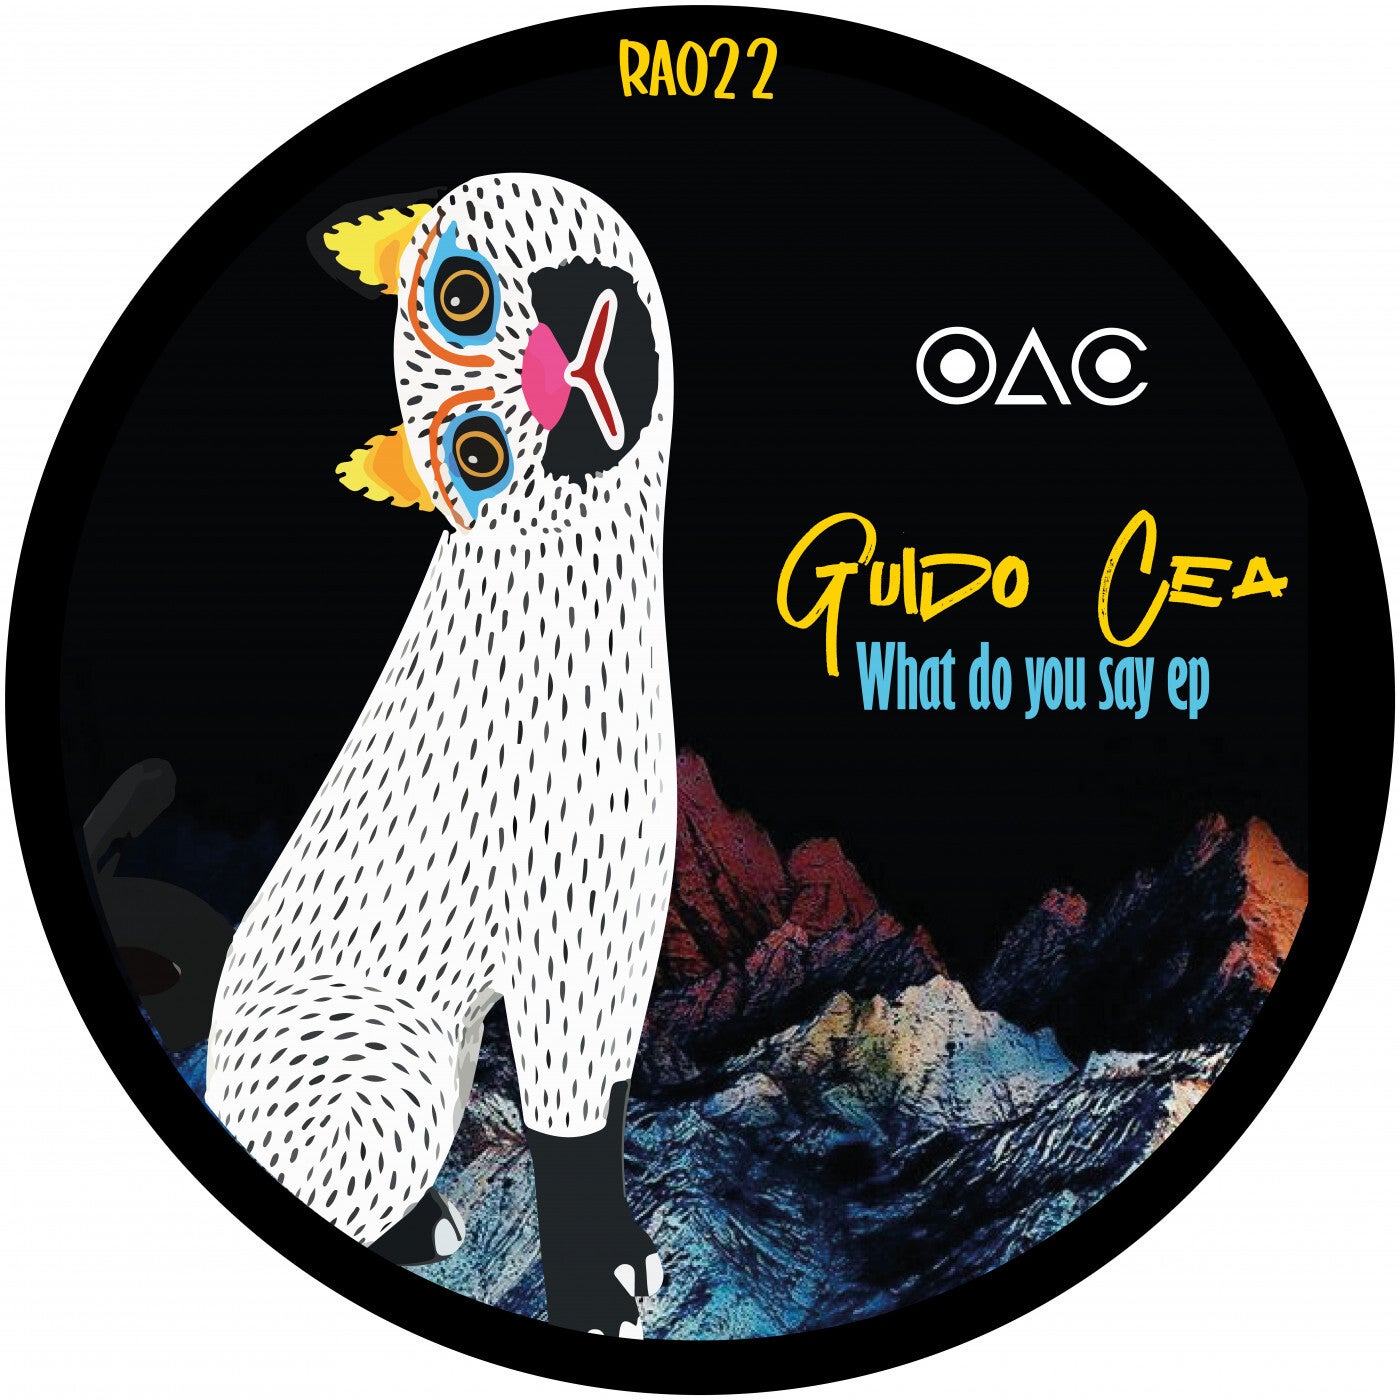 Guido Cea -  WHAT DO YOU SAY EP [RAD022]